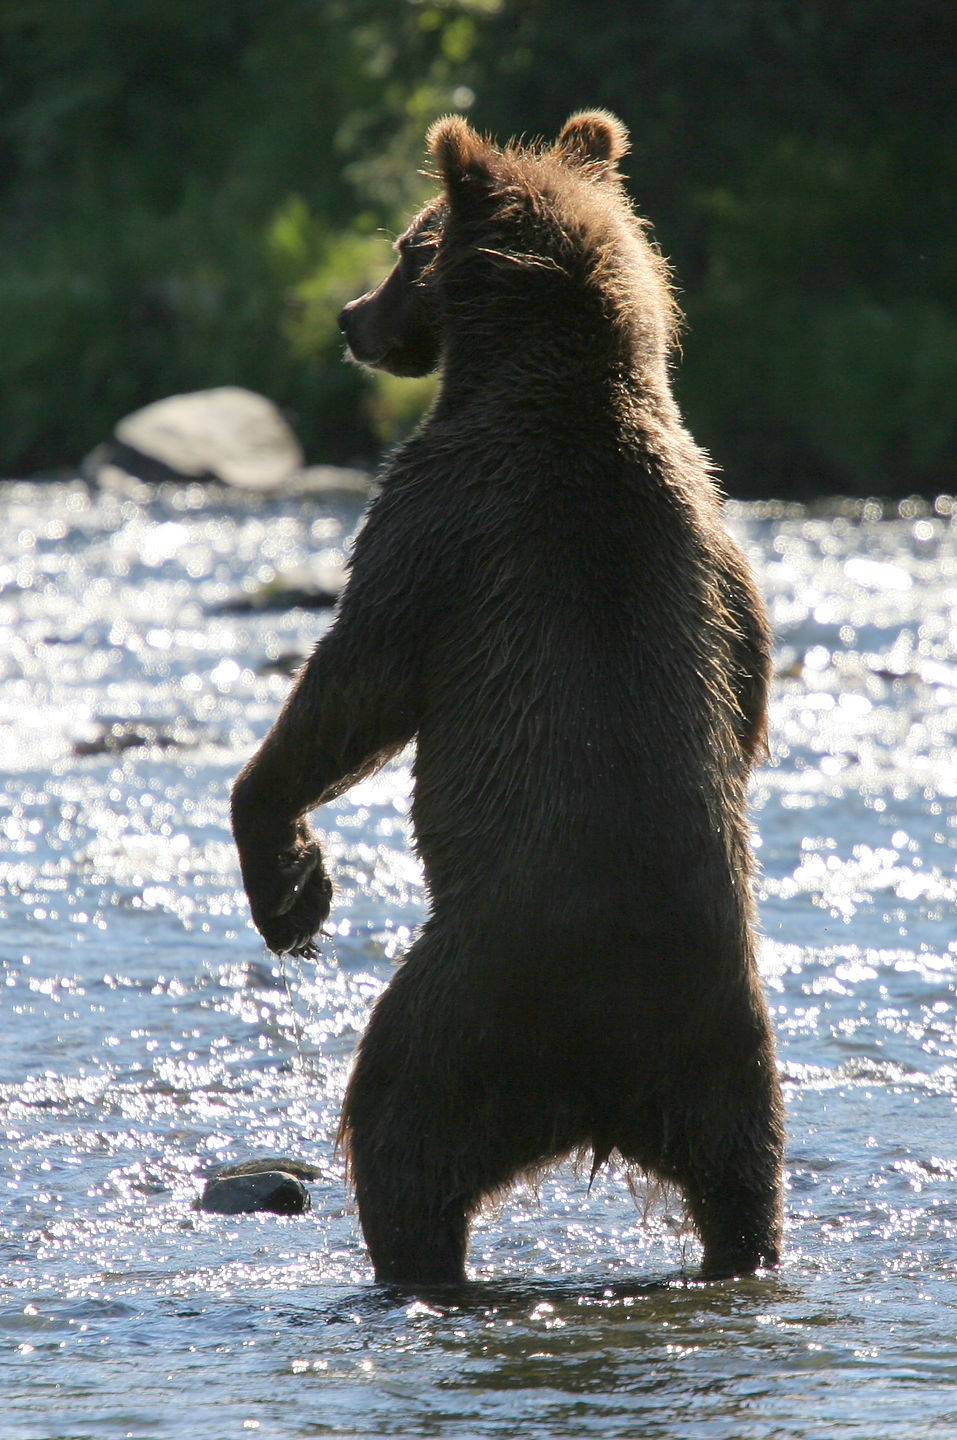 Grizzly bear scaring off fishermen